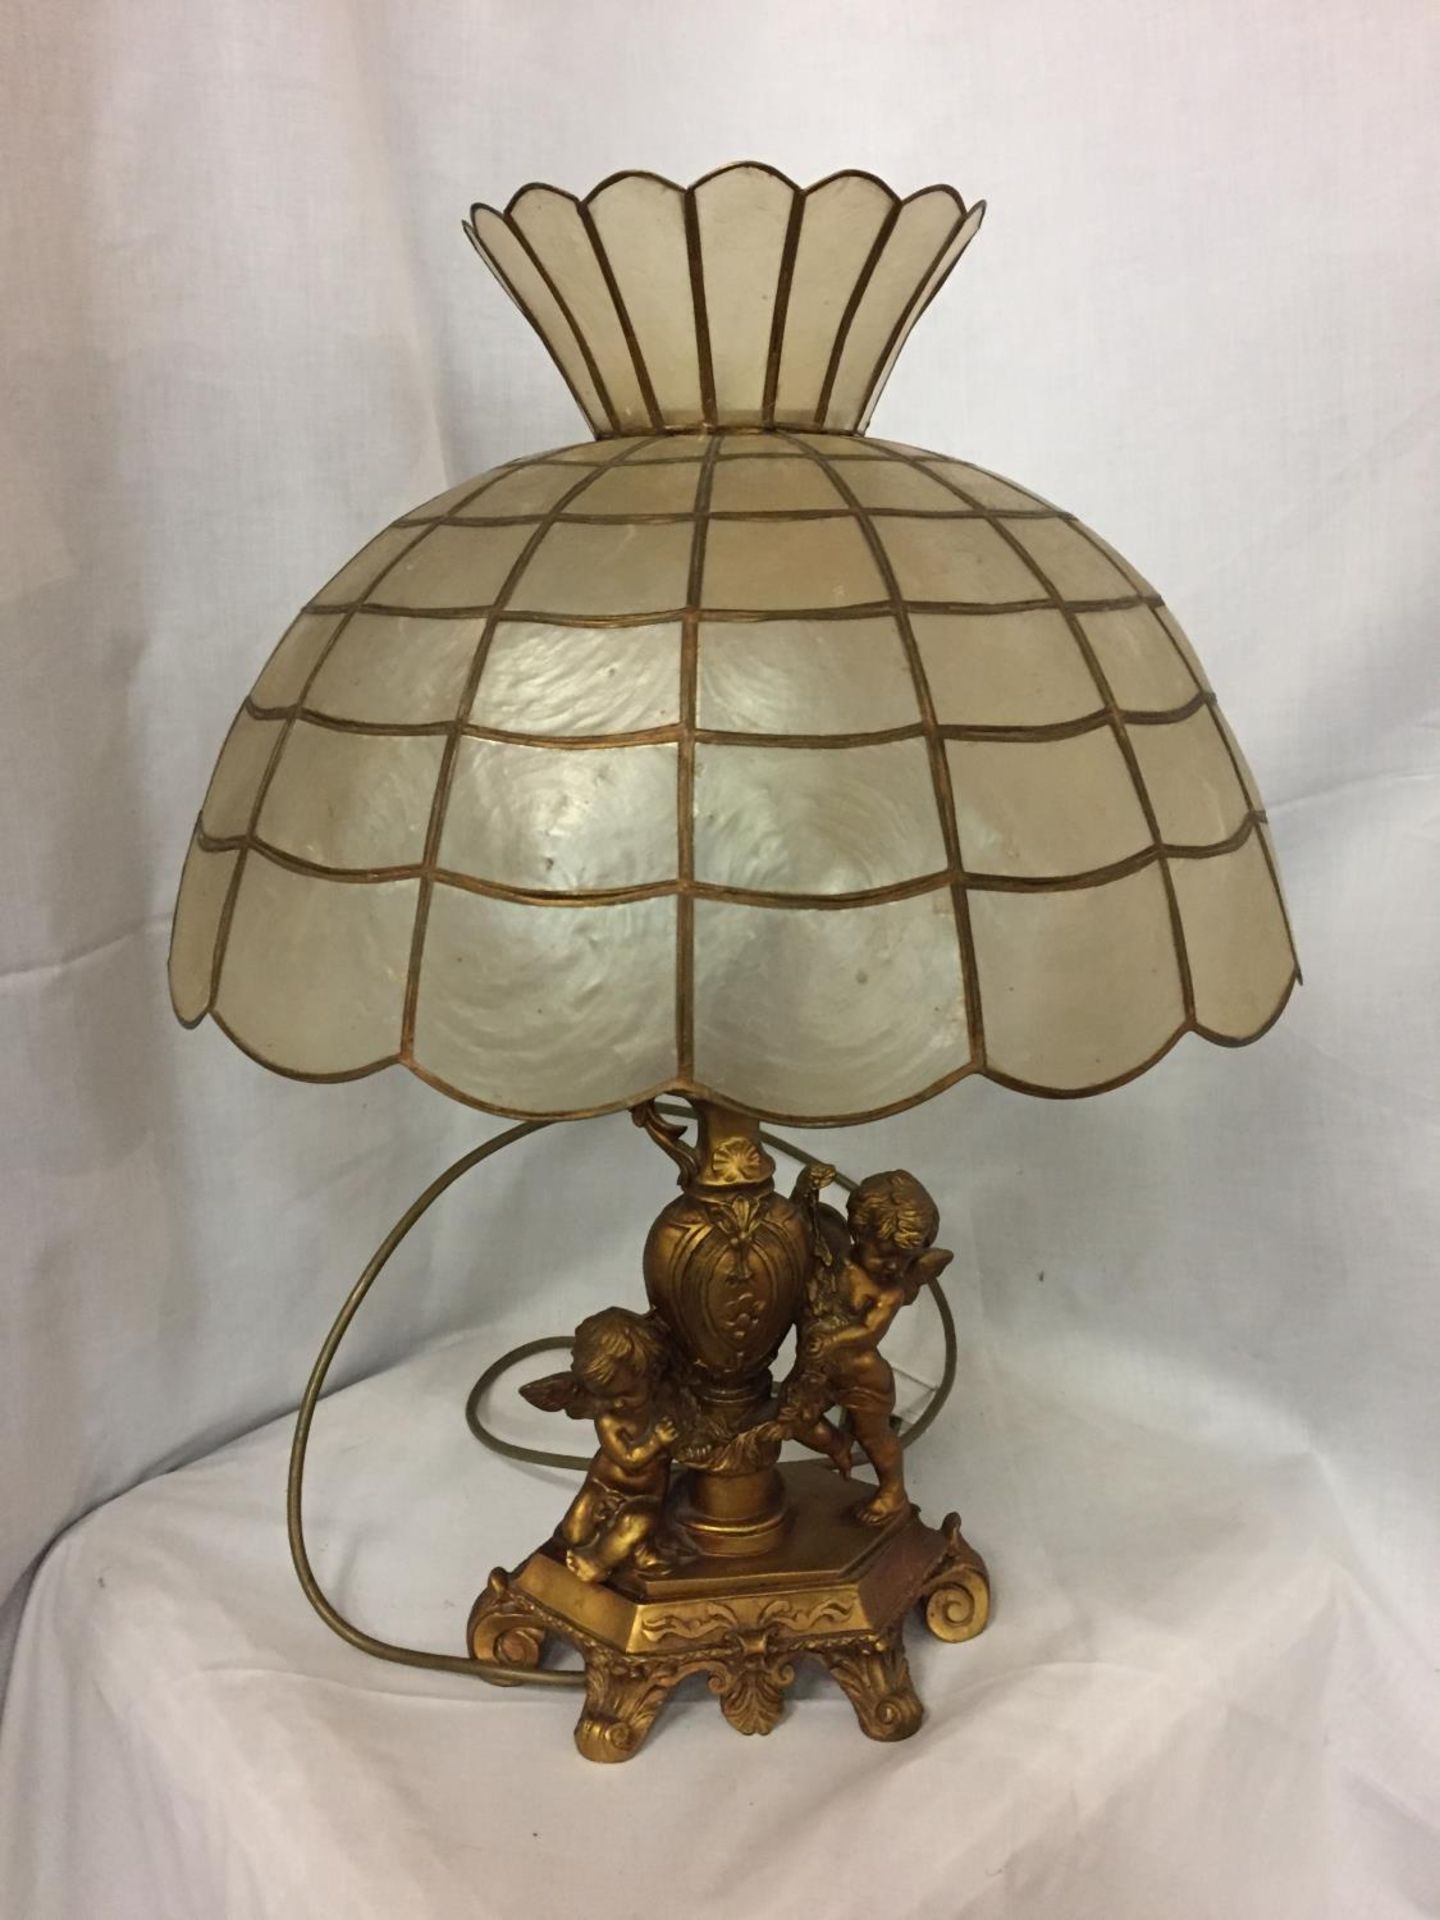 AN ORNATE GILDED LAMP BASE DEPICTING CHERUBS WITH A CAPIZ SHELL SHADE